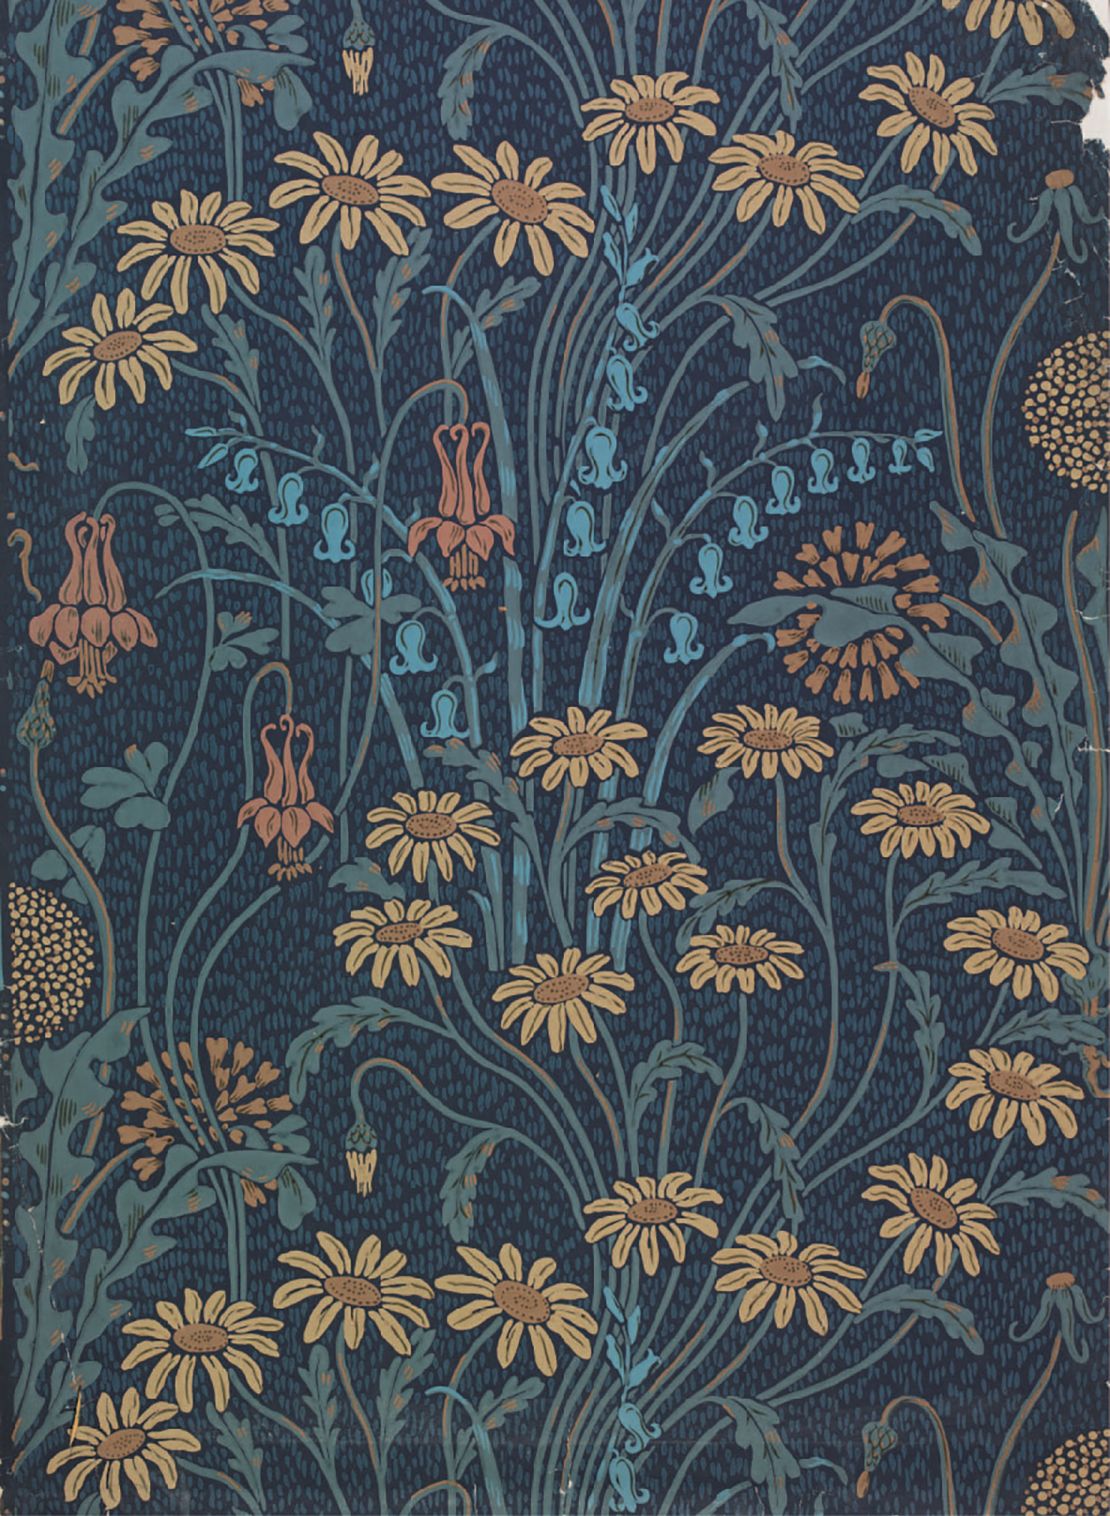 This sample of wallpaper "Dulce Domum" is by again by designer Walter Crane using color woodblock print. It dates to 1904.